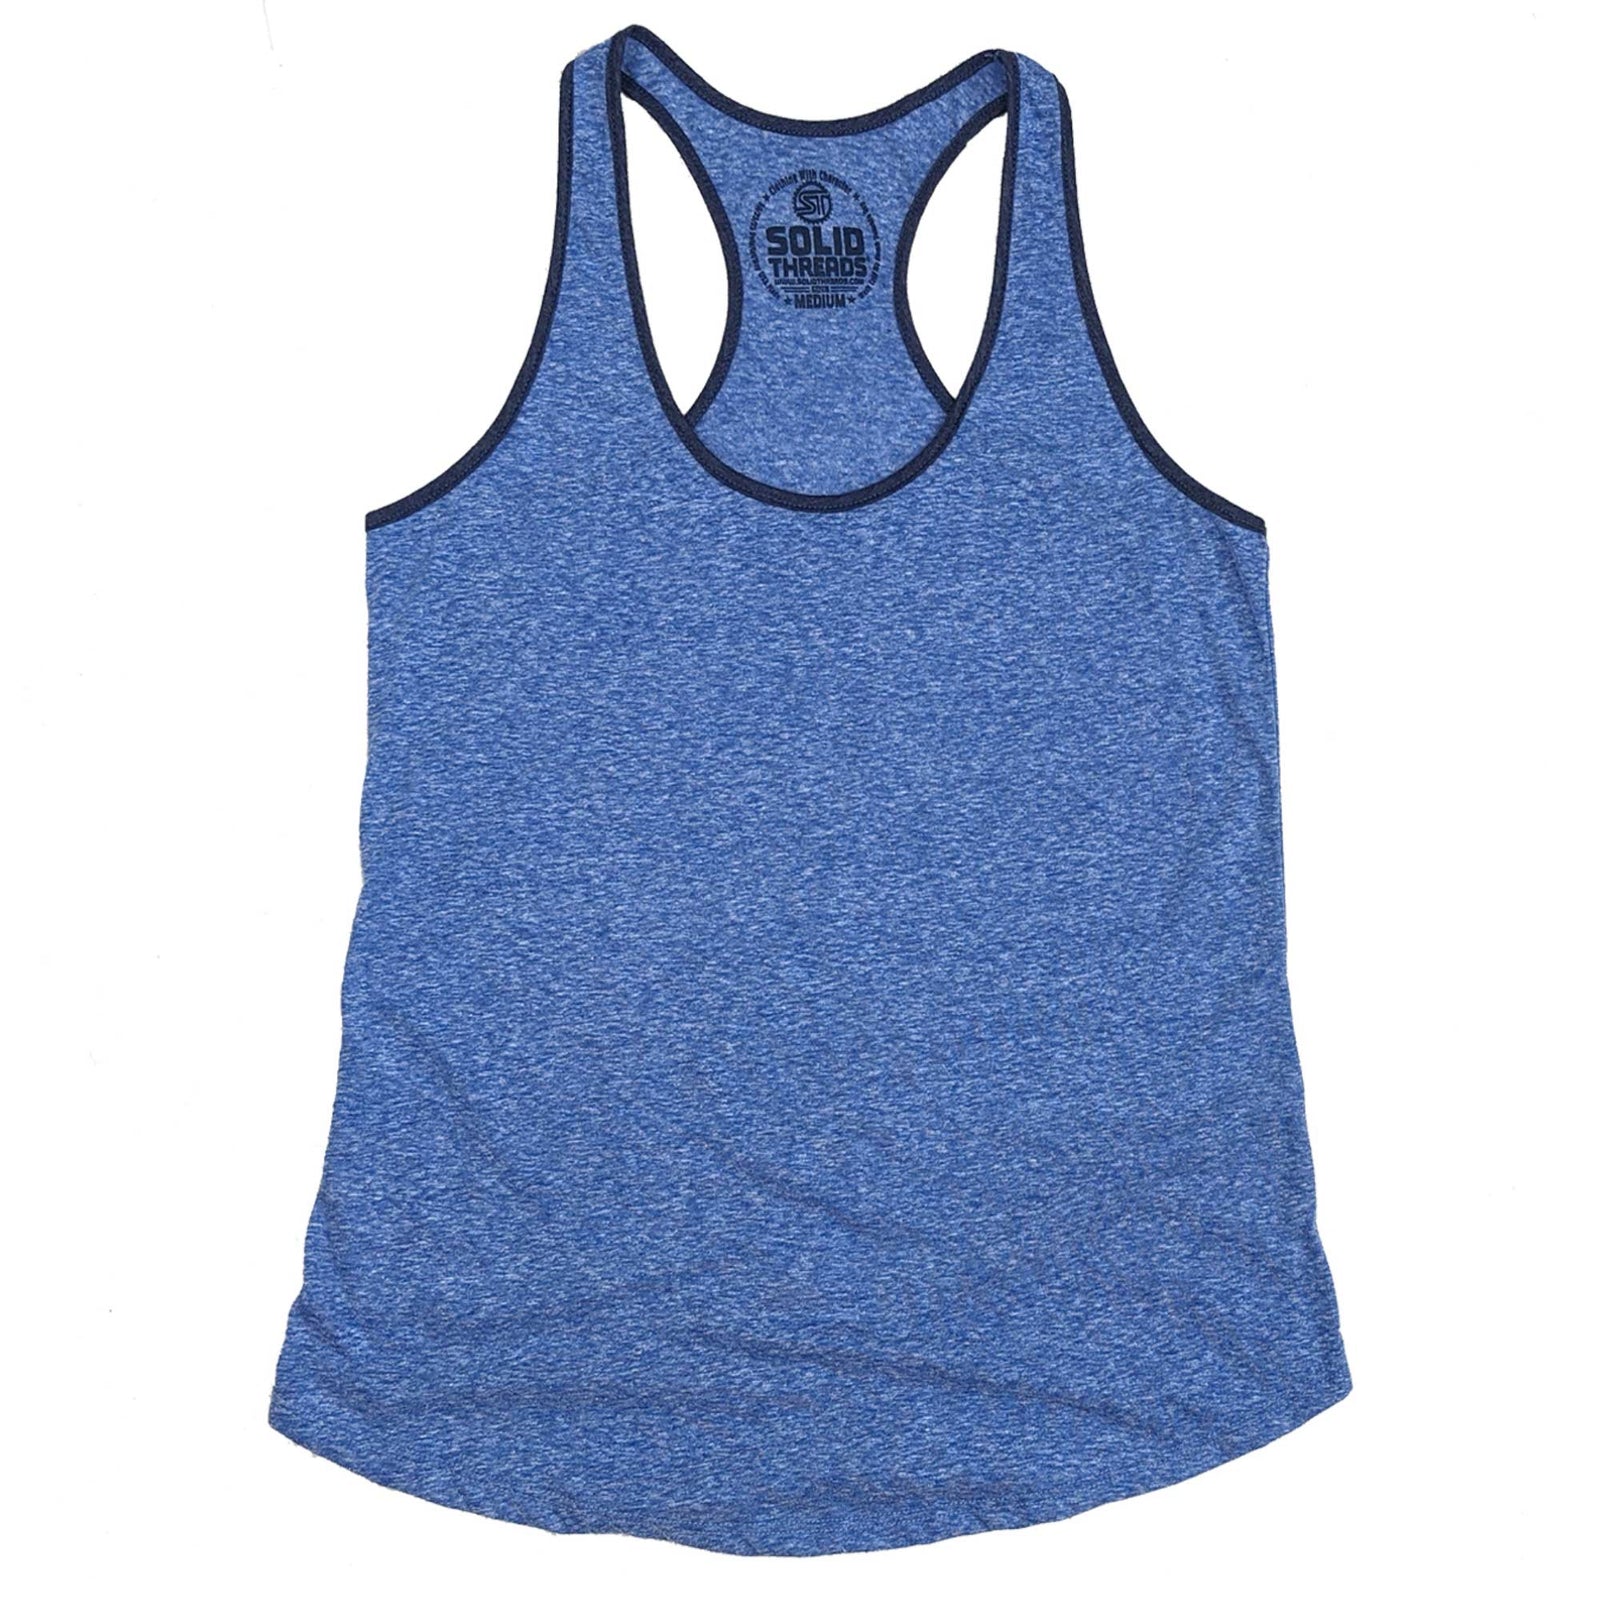 Women's Solid Threads Retro Ringer Triblend Royal/Navy Tank Top | Vintage Inspired USA Made Tee